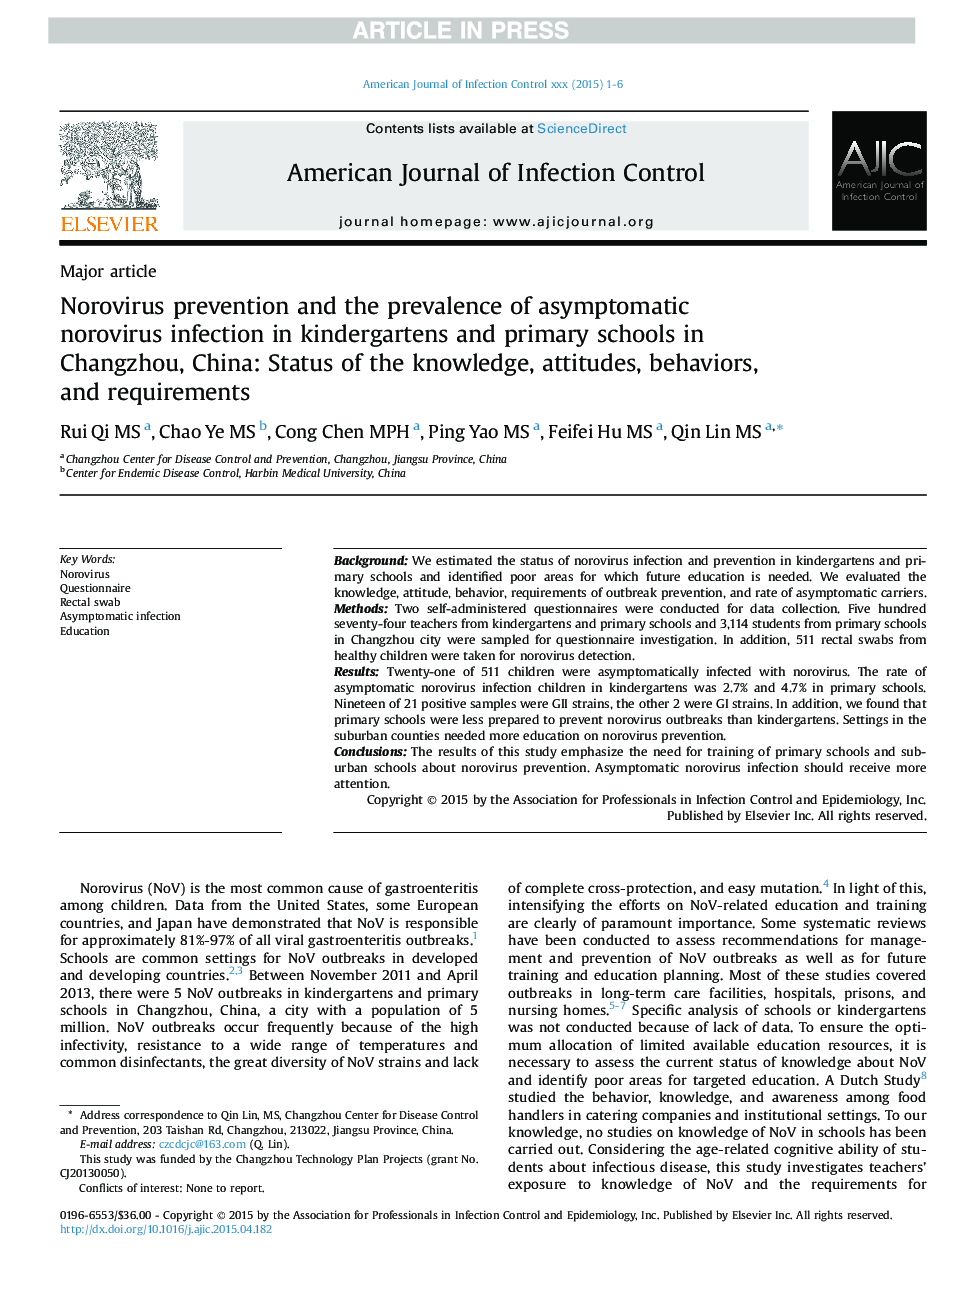 Norovirus prevention and the prevalence of asymptomatic norovirusÂ infection in kindergartens and primary schools in Changzhou, China: Status of the knowledge, attitudes, behaviors, and requirements